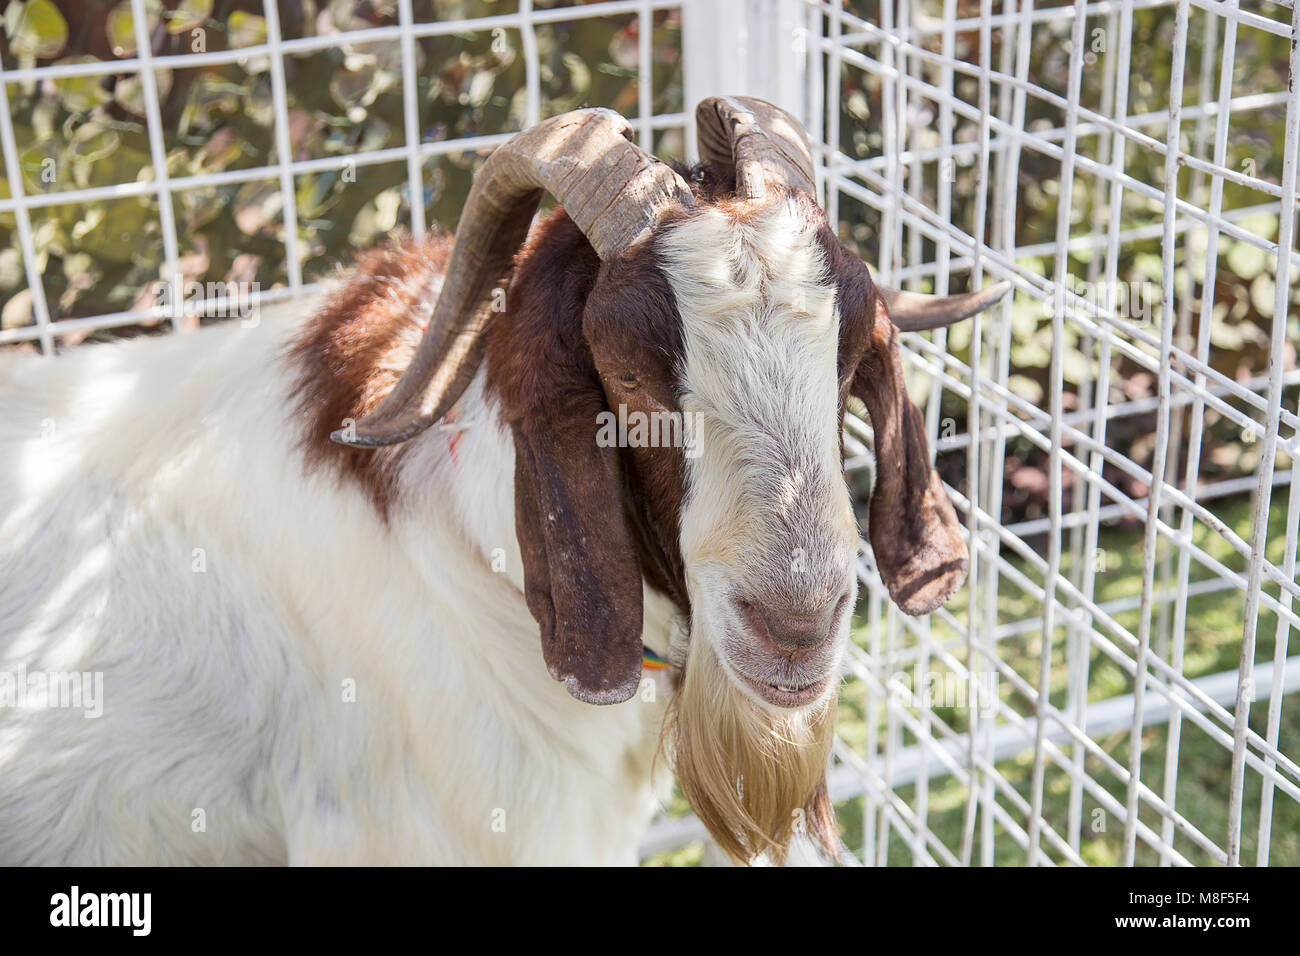 peaceful face of goat pet in cage farm agriculture life Stock Photo